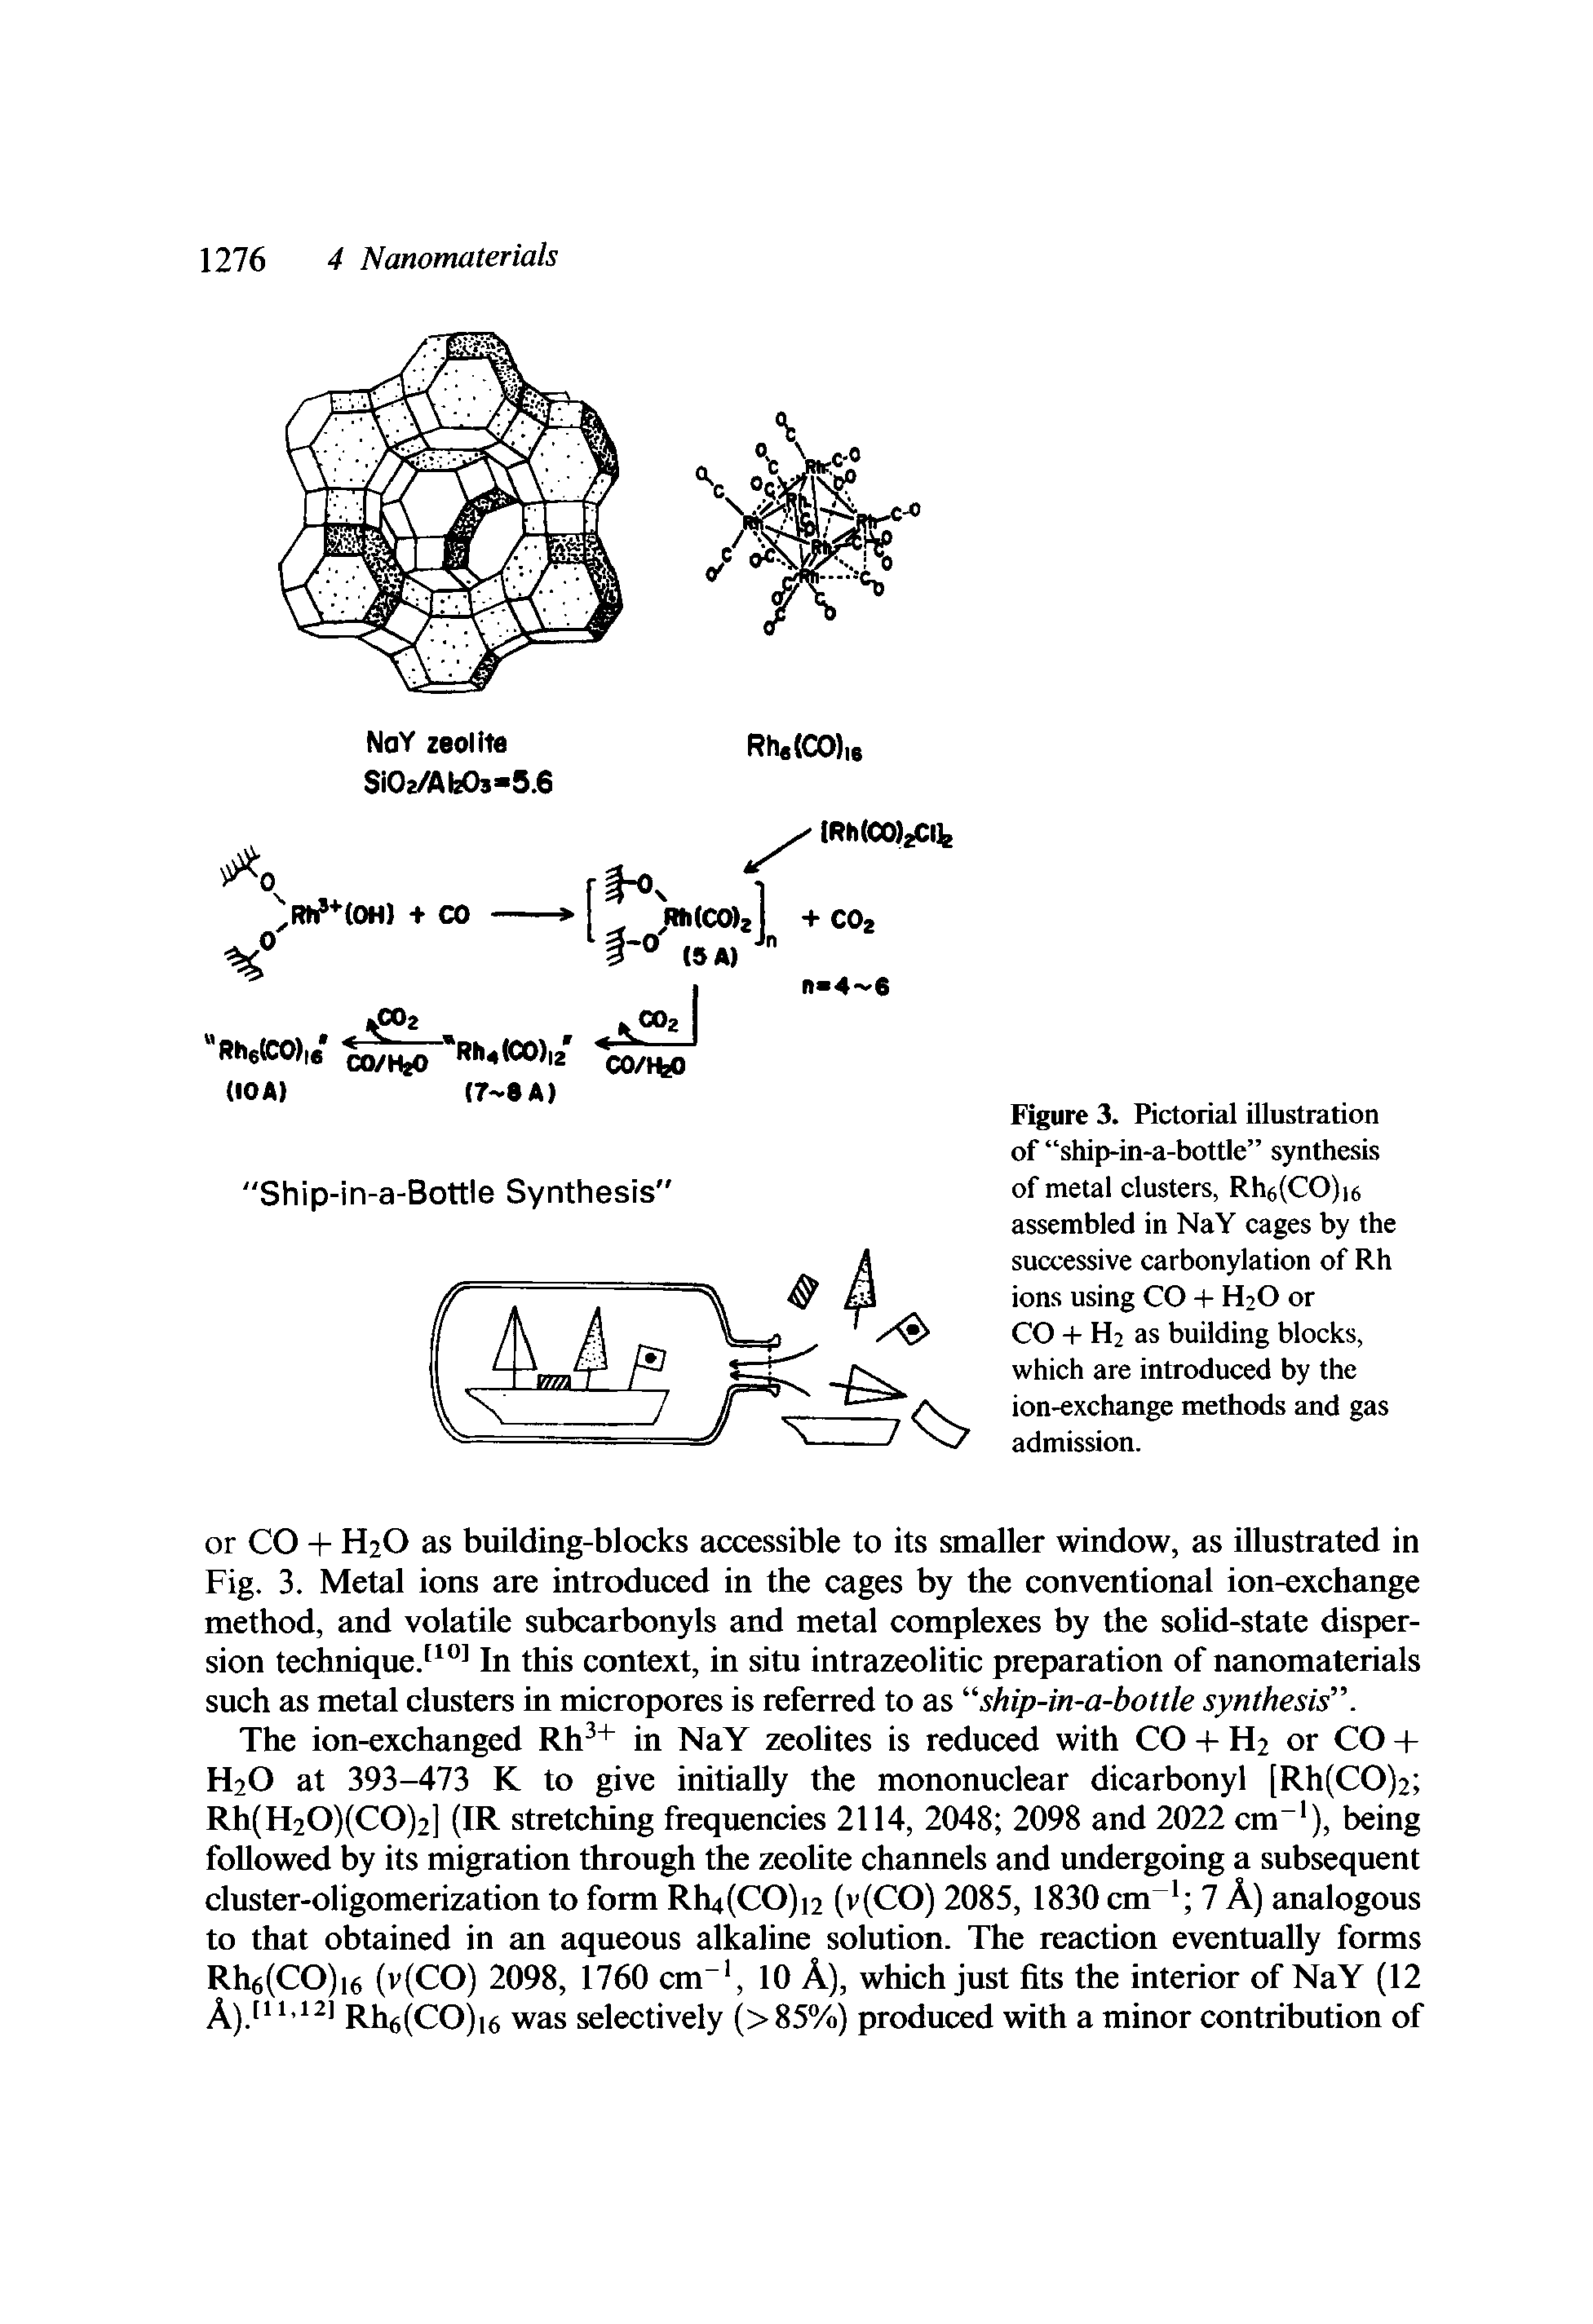 Figure 3. Pictorial illustration of ship-in-a-bottle synthesis of metal clusters, Rh6(CO)i6 assembled in NaY cages by the suecessive carbonylation of Rh ions using CO + H2O or CO + H2 as building blocks, which are introduced by the ion-exchange methods and gas admission.